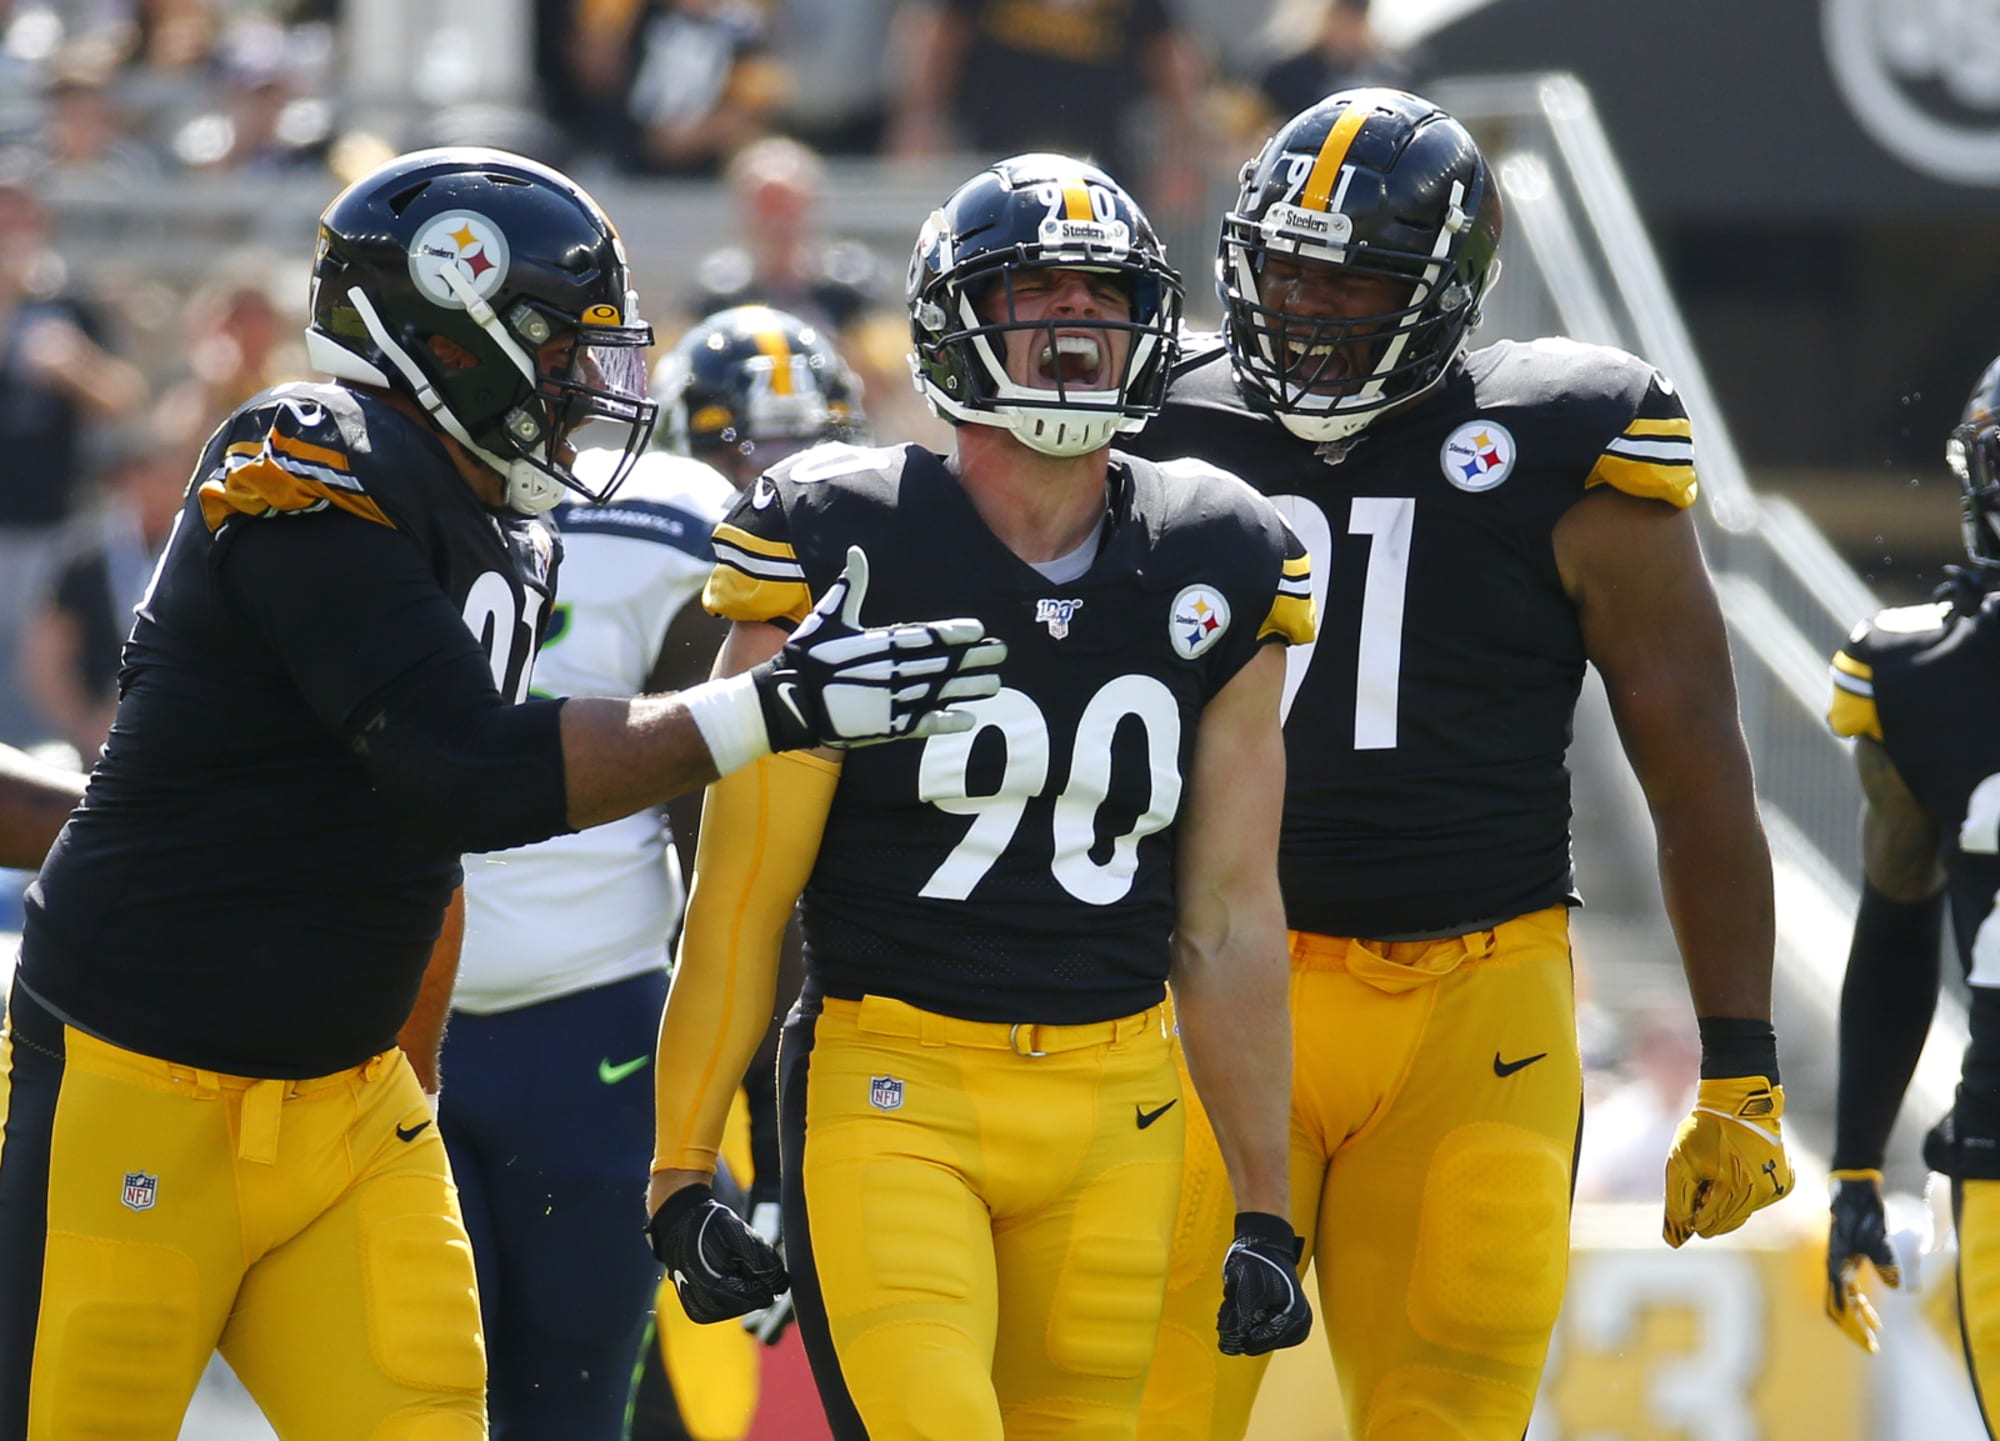 Do the Steelers have the best defensive line in the NFL?